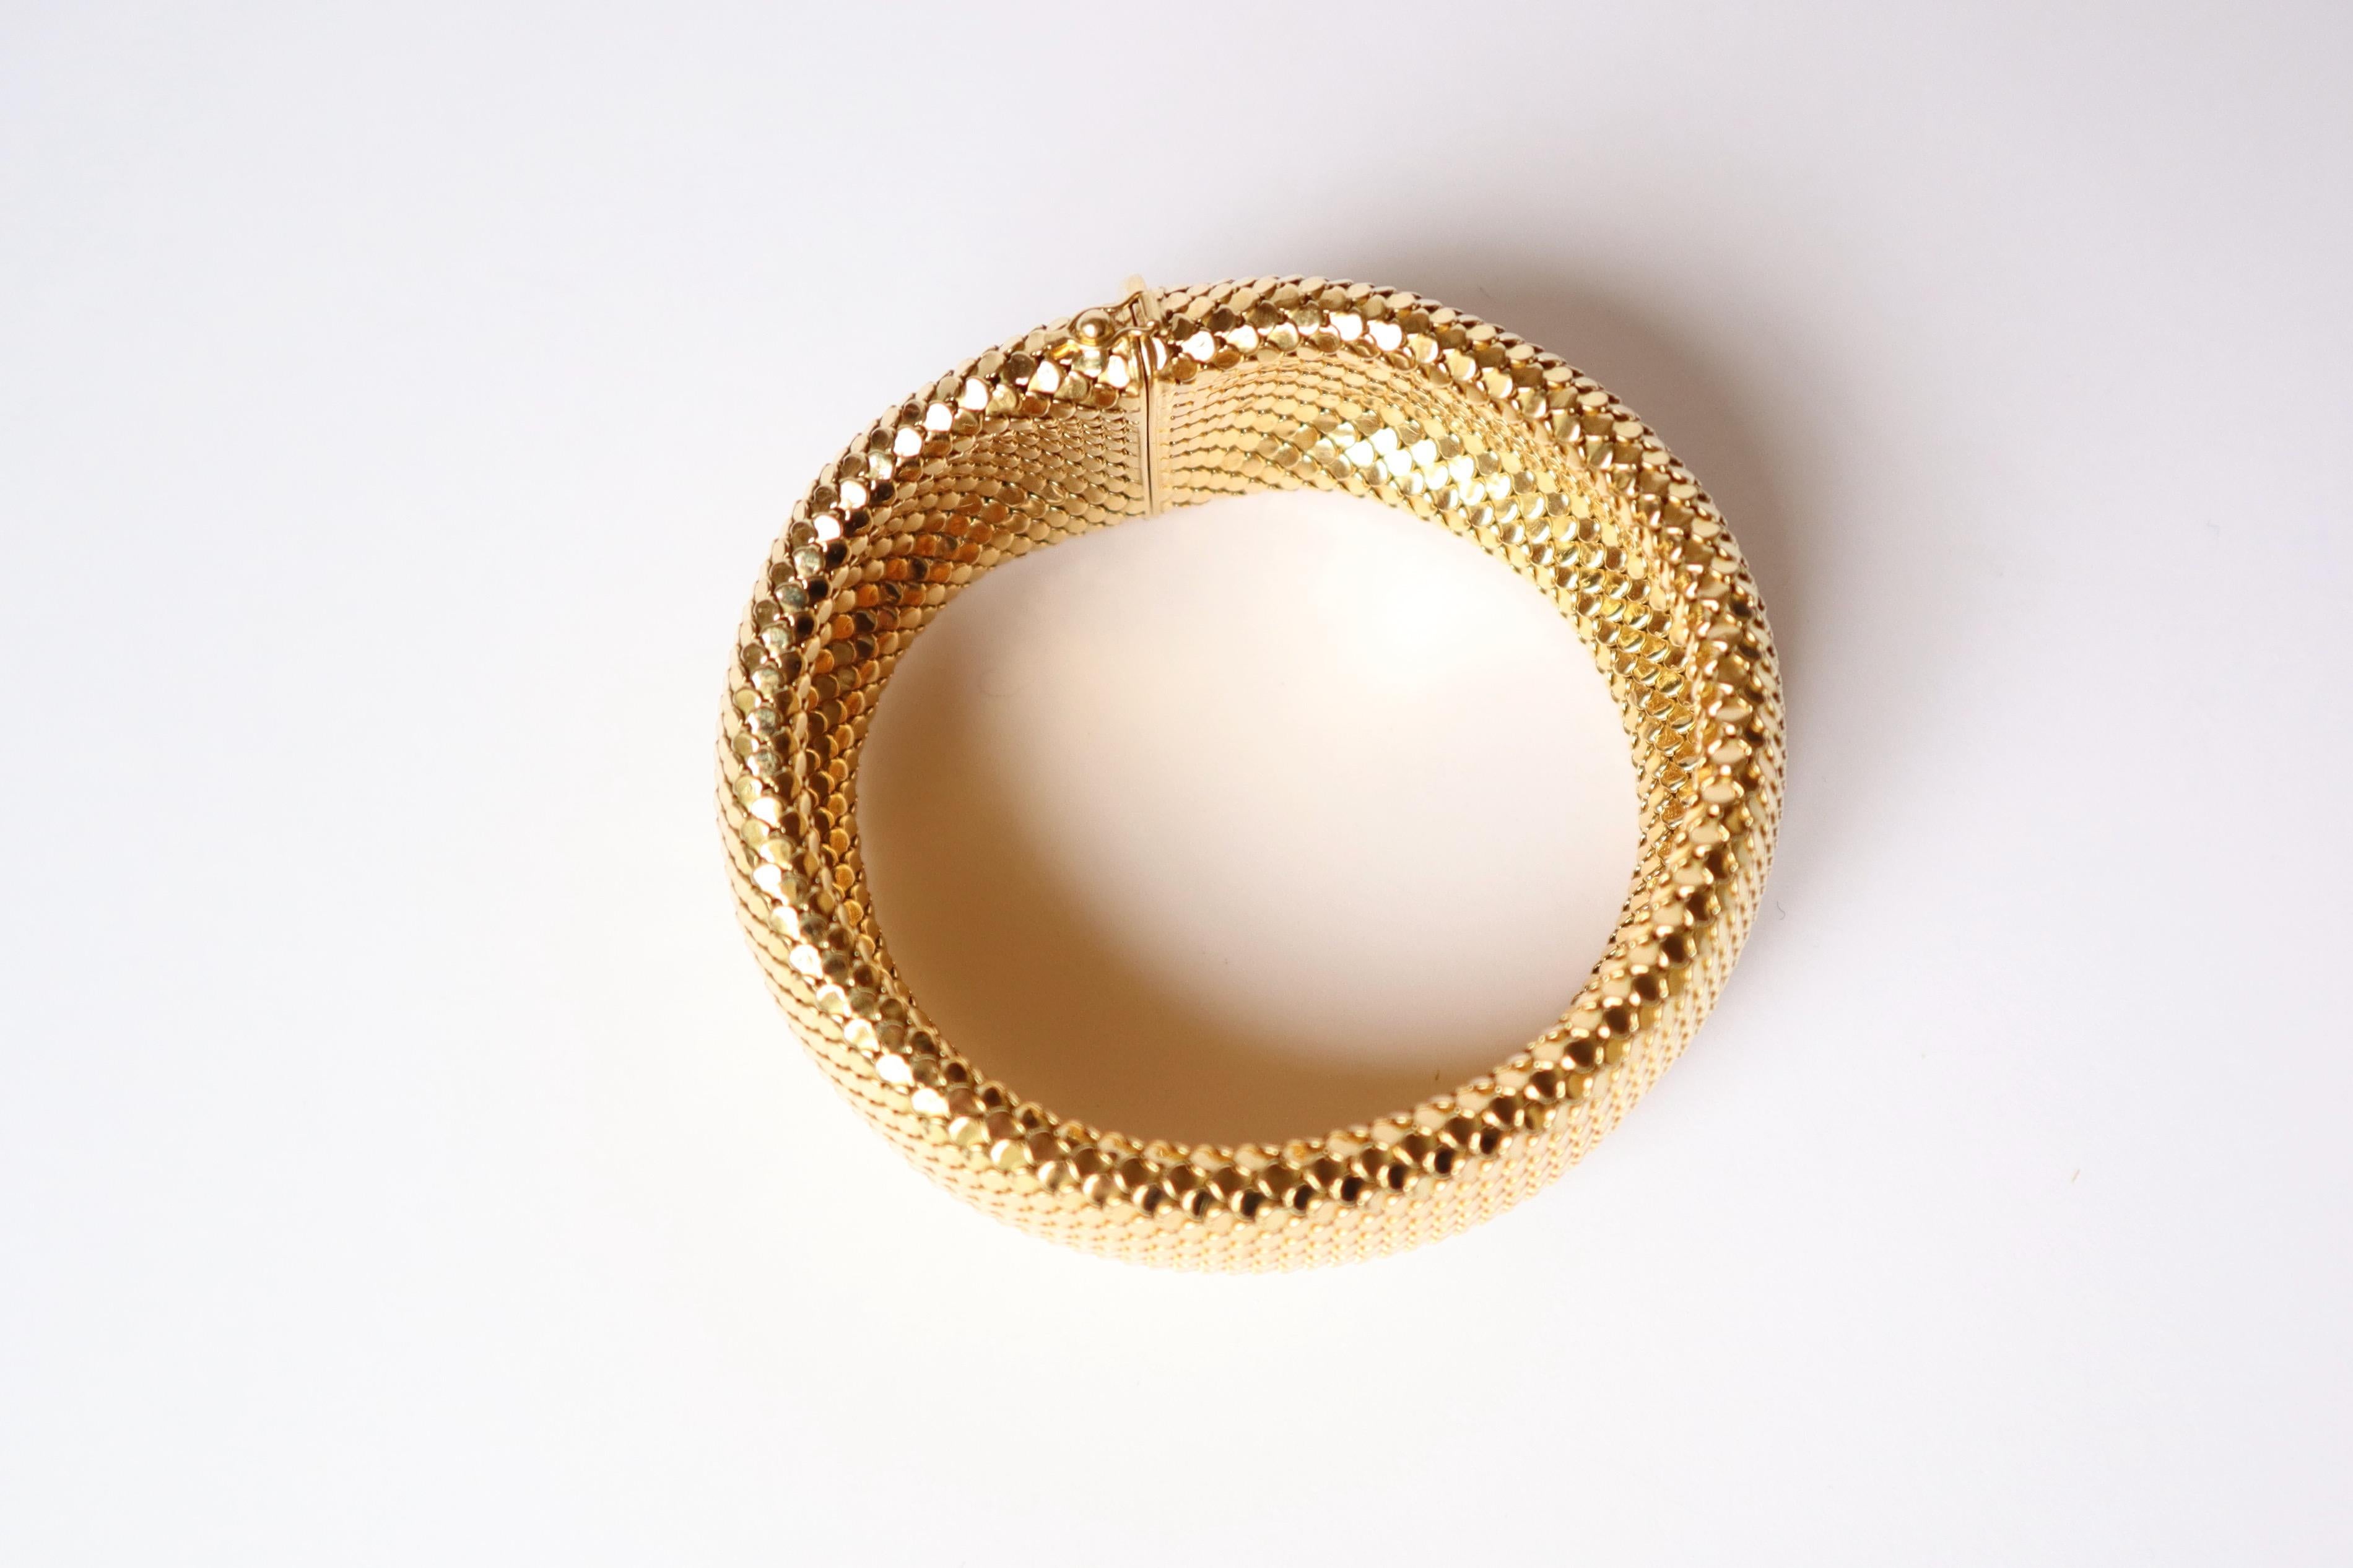 Flexible wide domed fish scale bracelet in 18 carat yellow gold from the 2000's
Eagle Head Hallmark for 18K gold
2 Safety Eights
Length: 20cm Width: 2.8cm
Gross weight: 93g